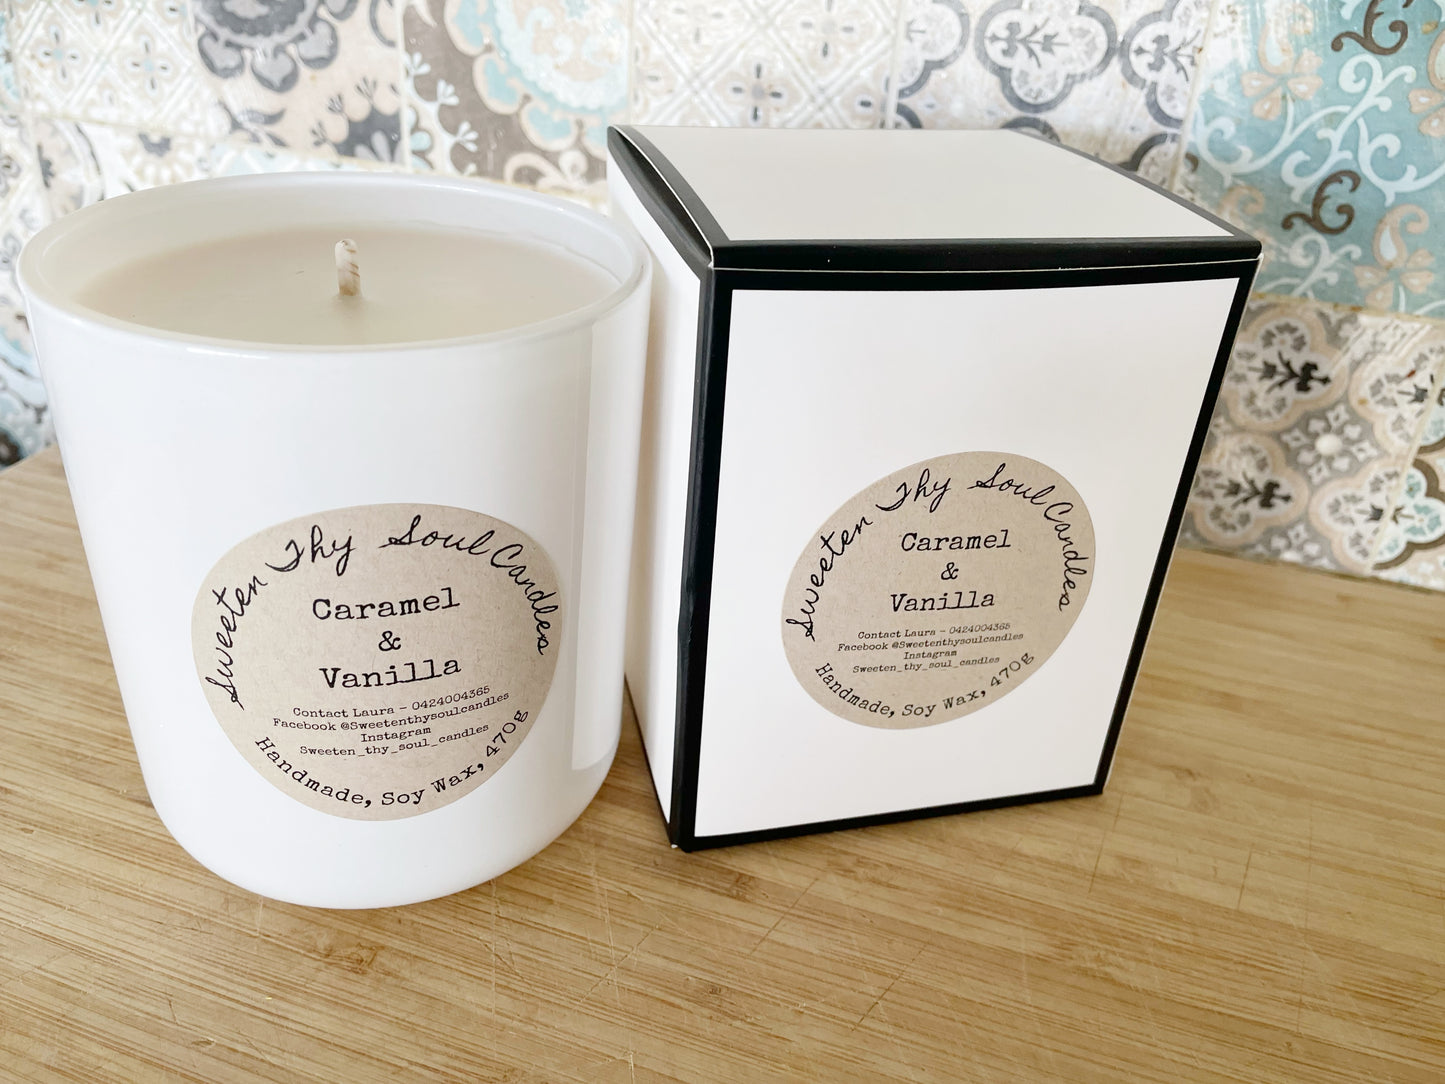 Caramel and Vanilla 470g soy candle